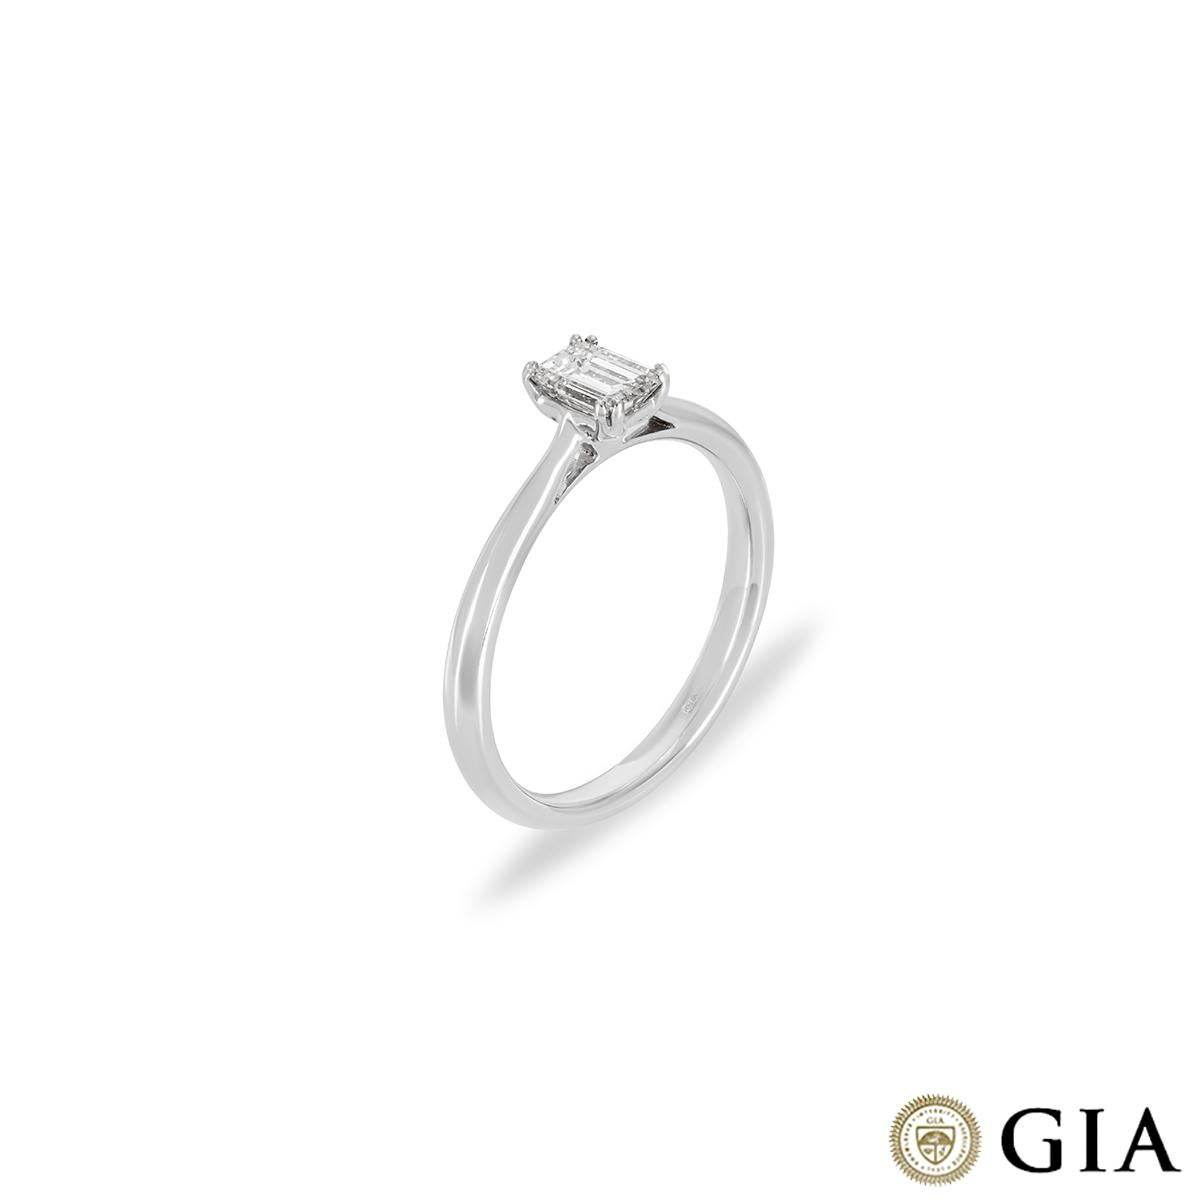 A captivating 18k white gold diamond engagement ring. The solitaire features an emerald cut diamond weighing 0.43ct, E colour and VS2 clarity. The ring tapers from 1mm to 2mm in width, has a gross weight of 2.70 grams and is currently a UK size M½/